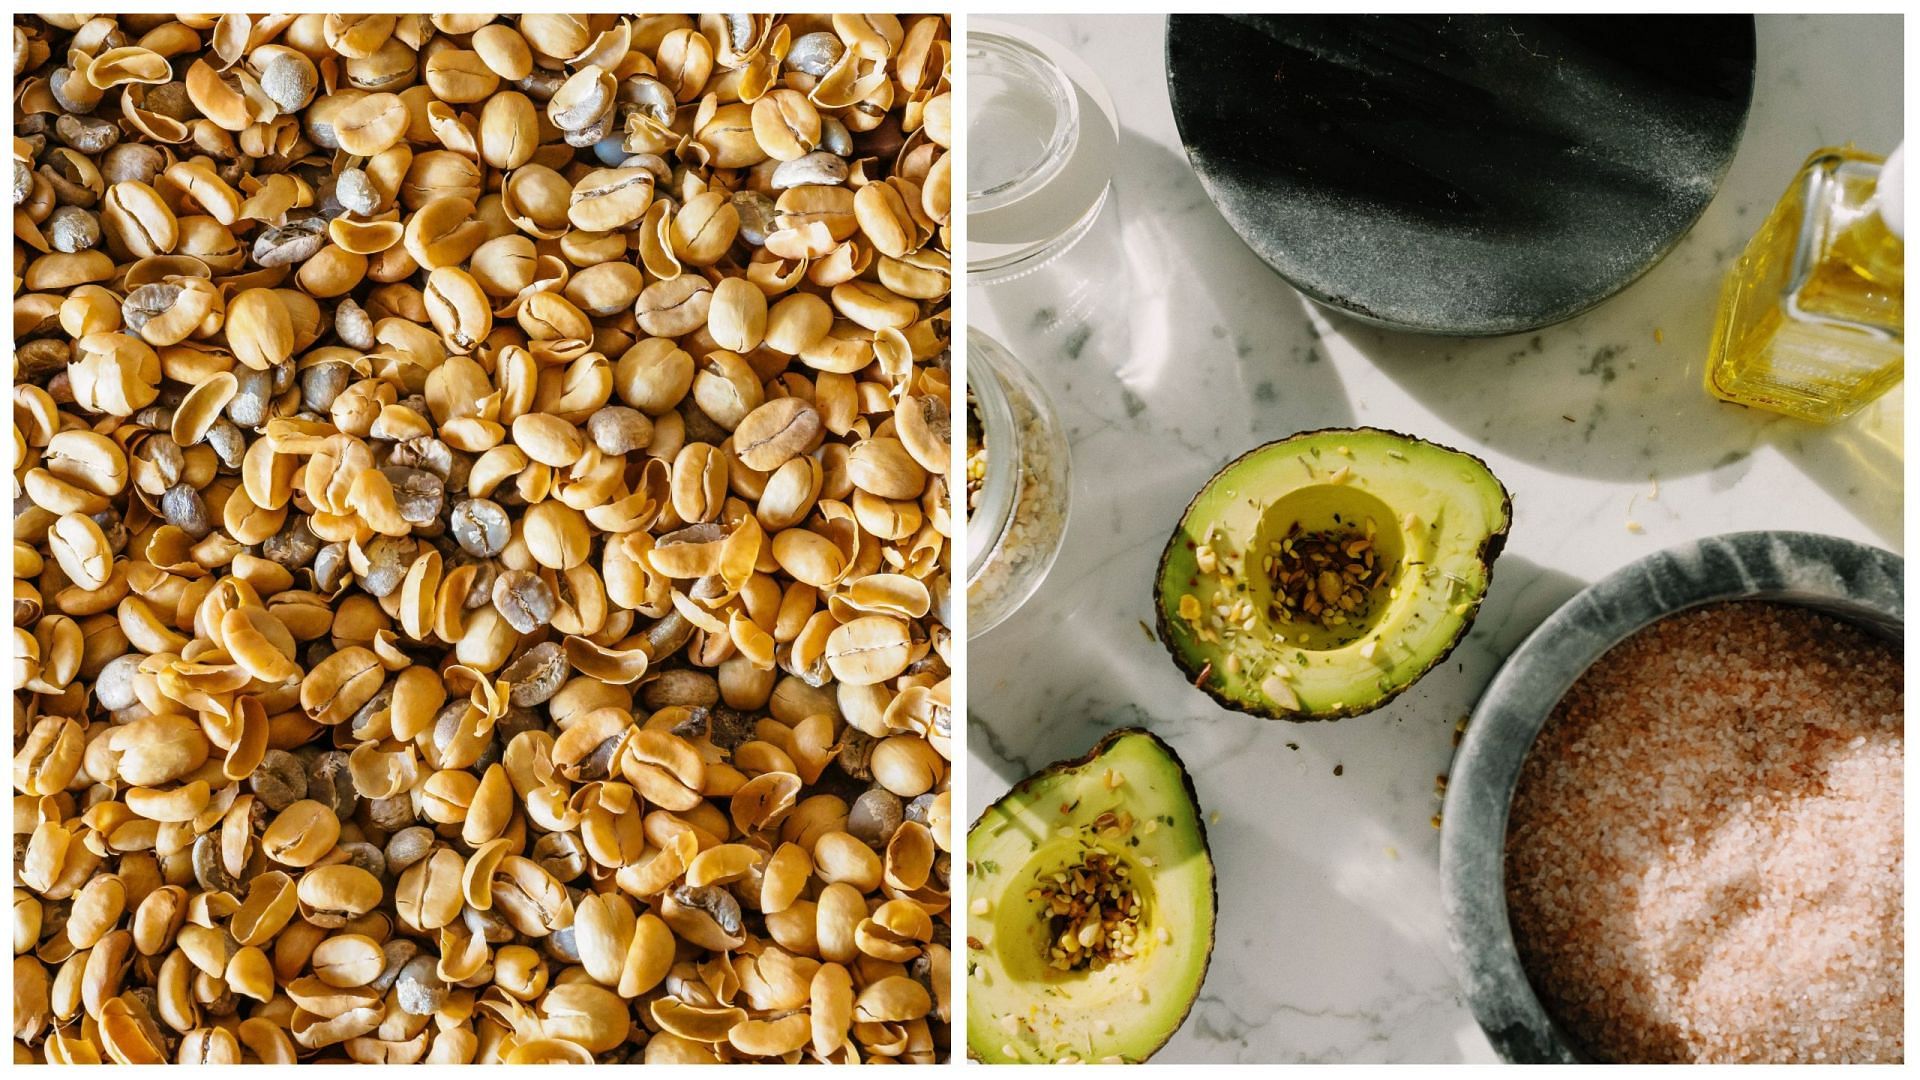 Hemp seeds have a high nutritional value and provides various health benefits. (Image via Unsplash Alexander Schimmeck / Pexels Ready Made))